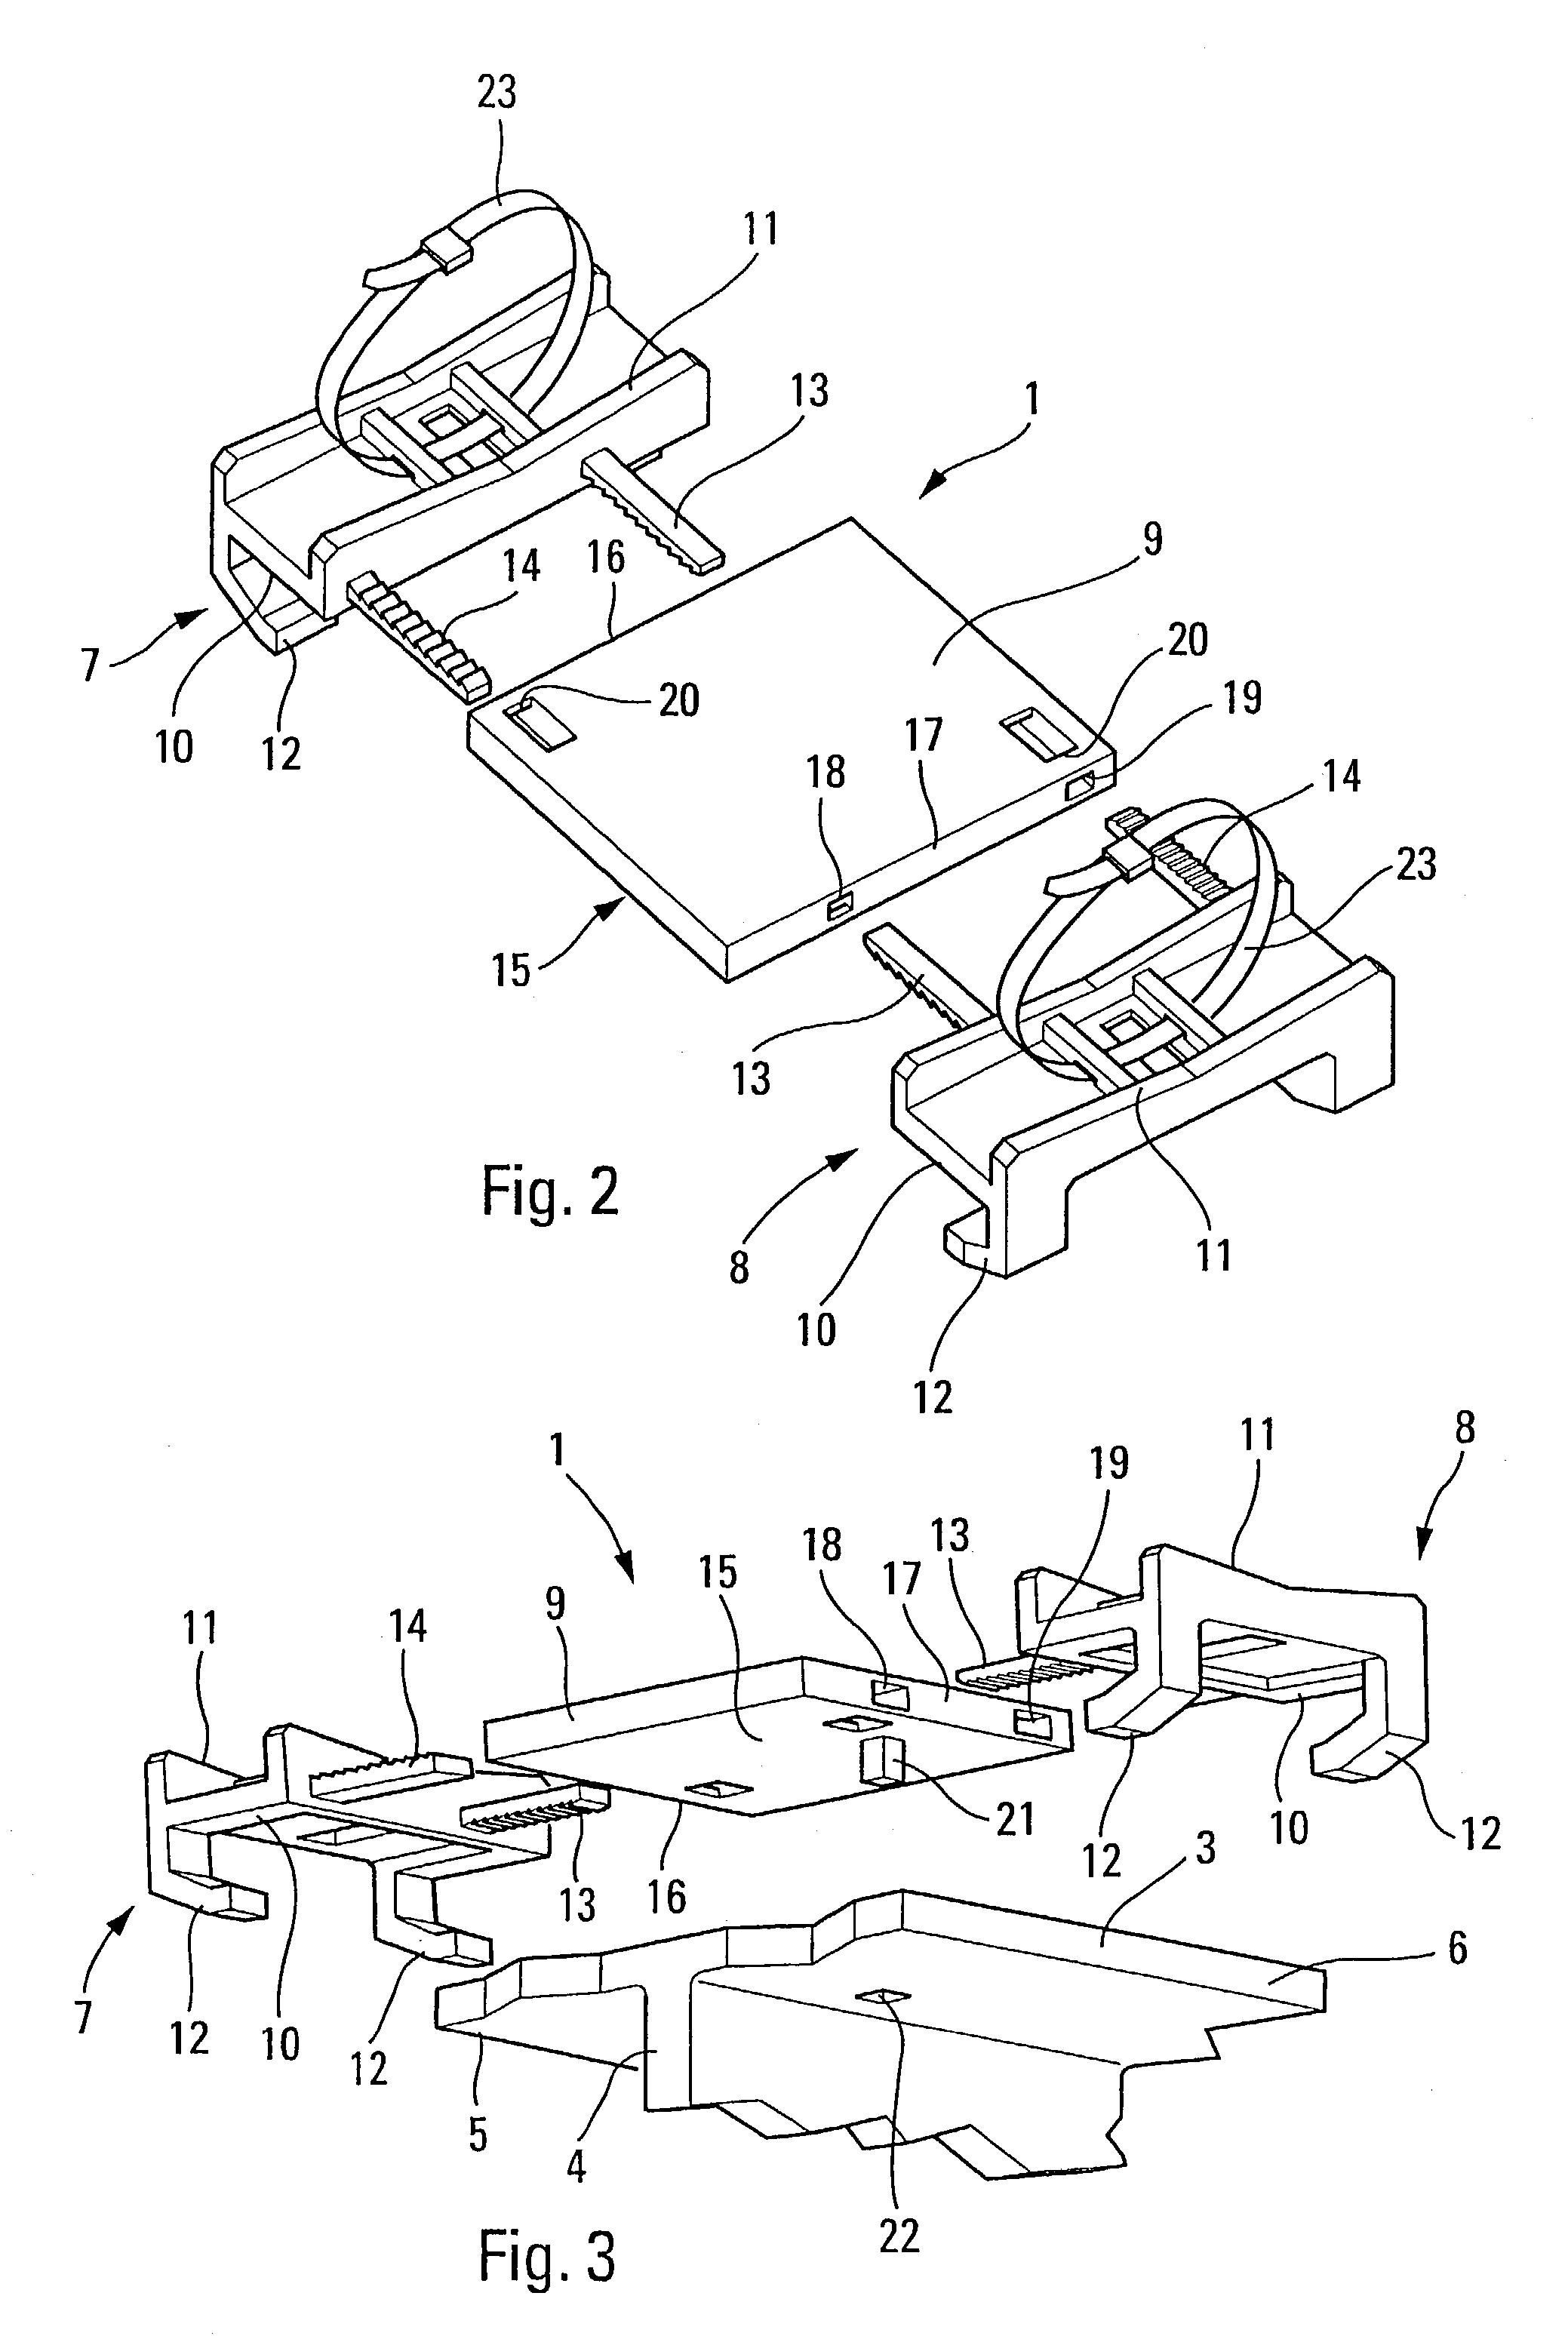 Device for fastening elongate objects onto a flat support